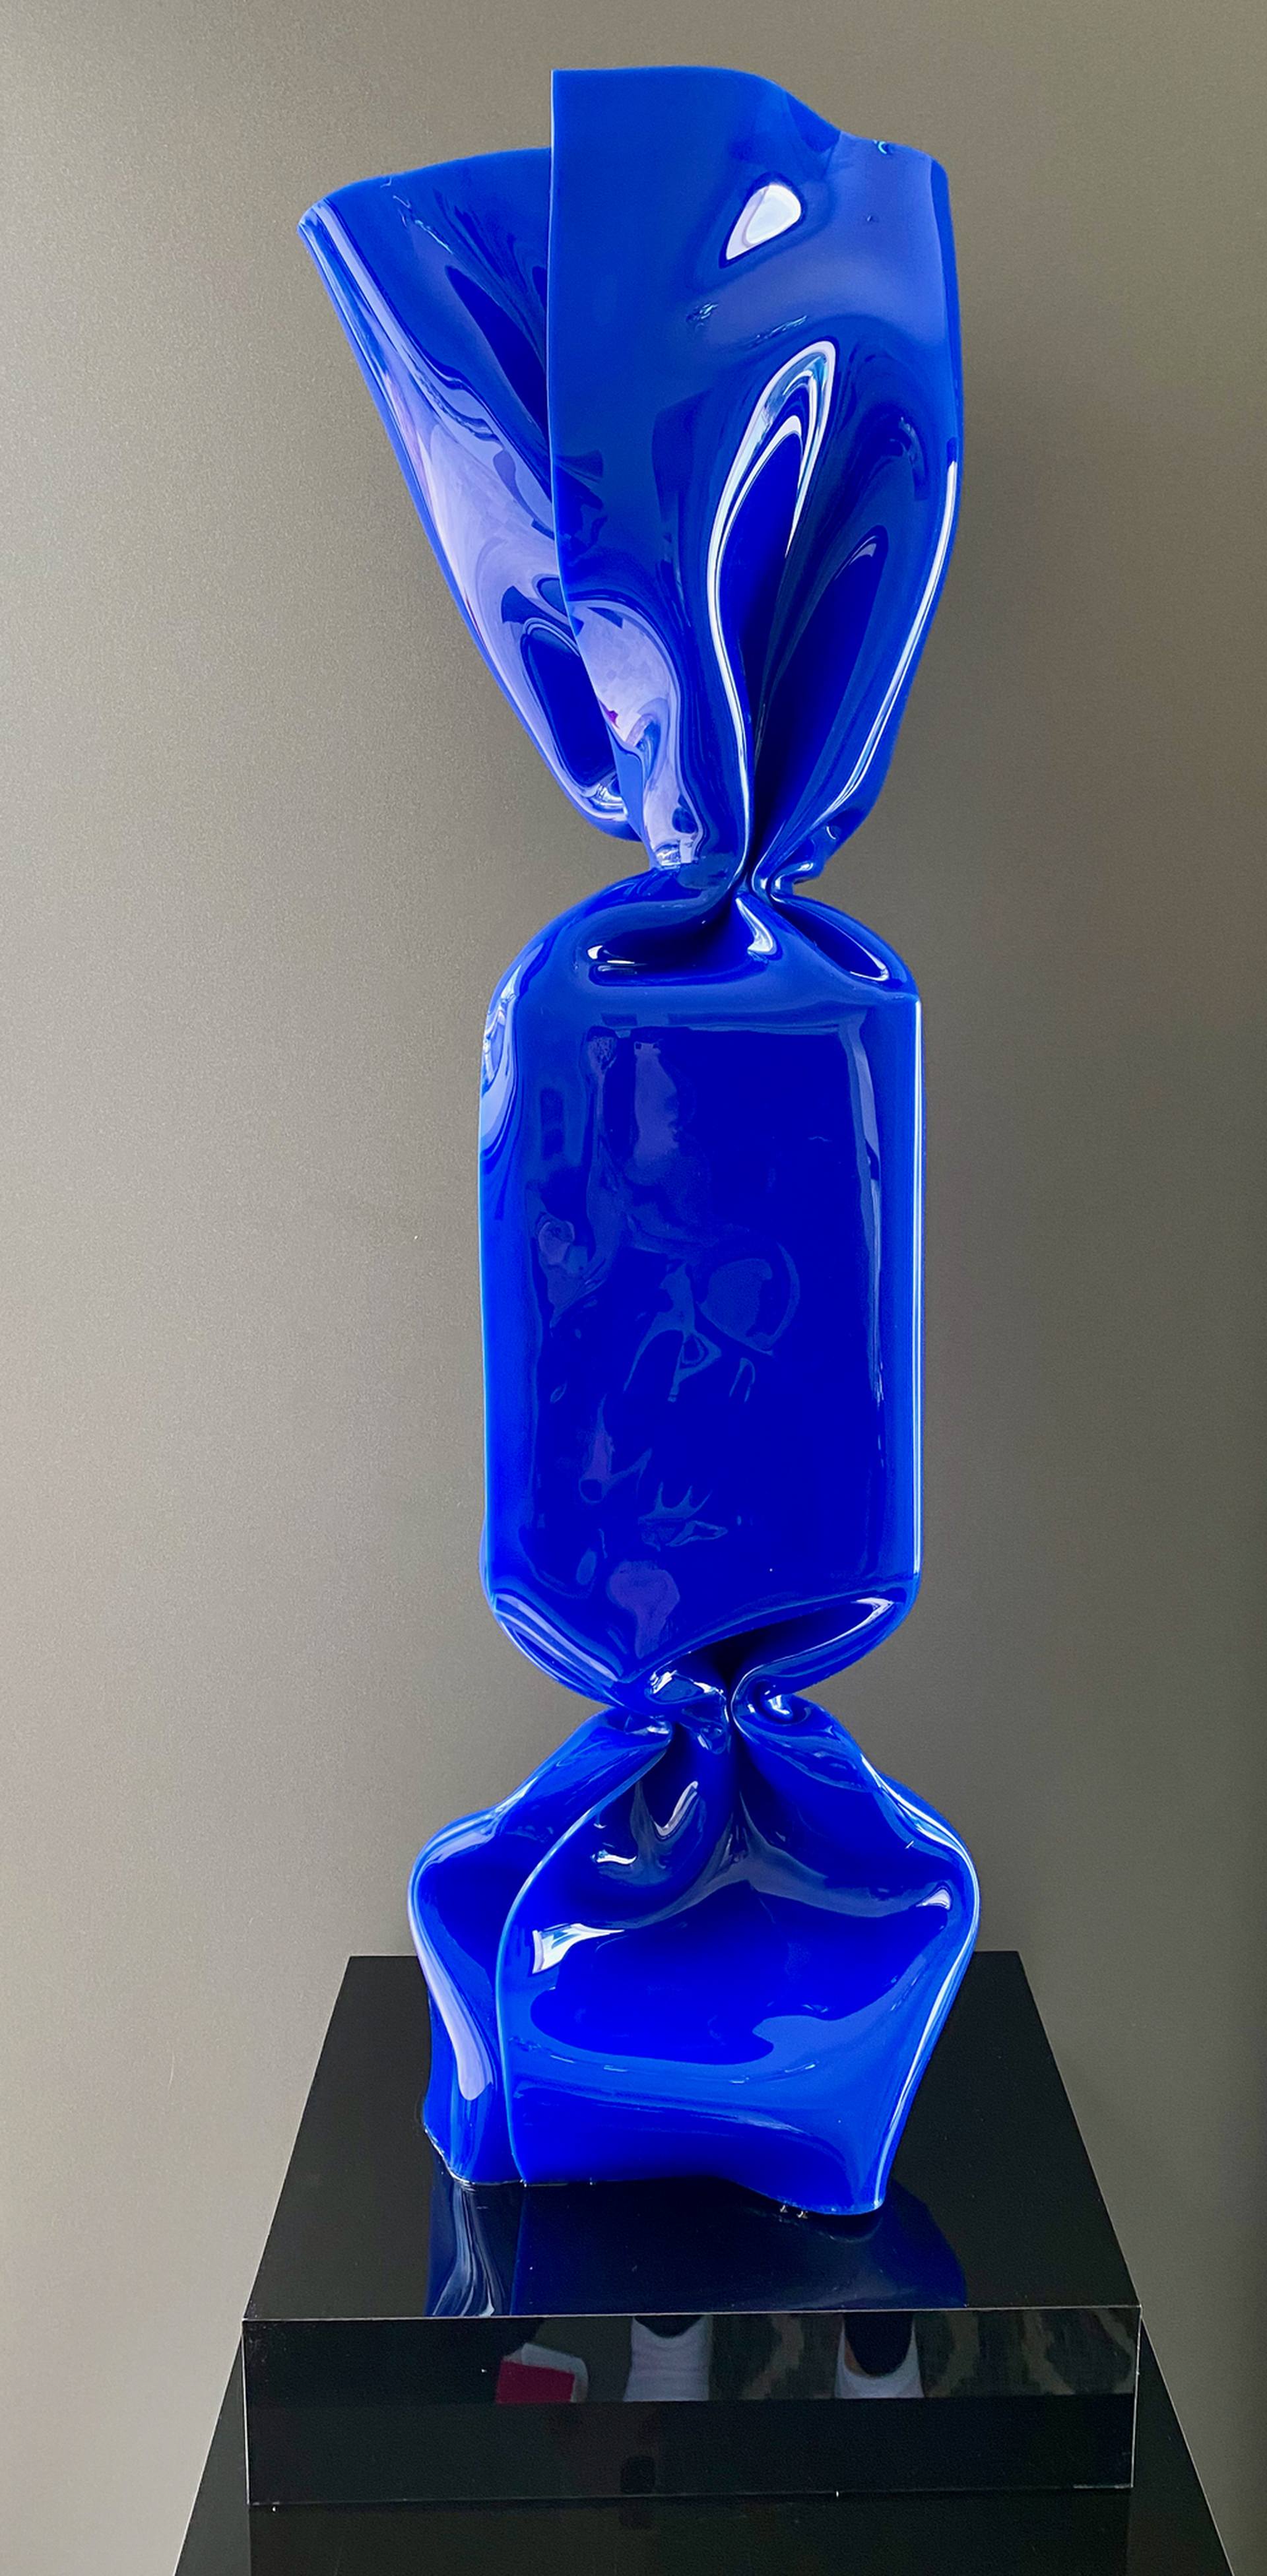 ▷ Bonbon Gucci by Laurence Jenkell, 2019, Sculpture